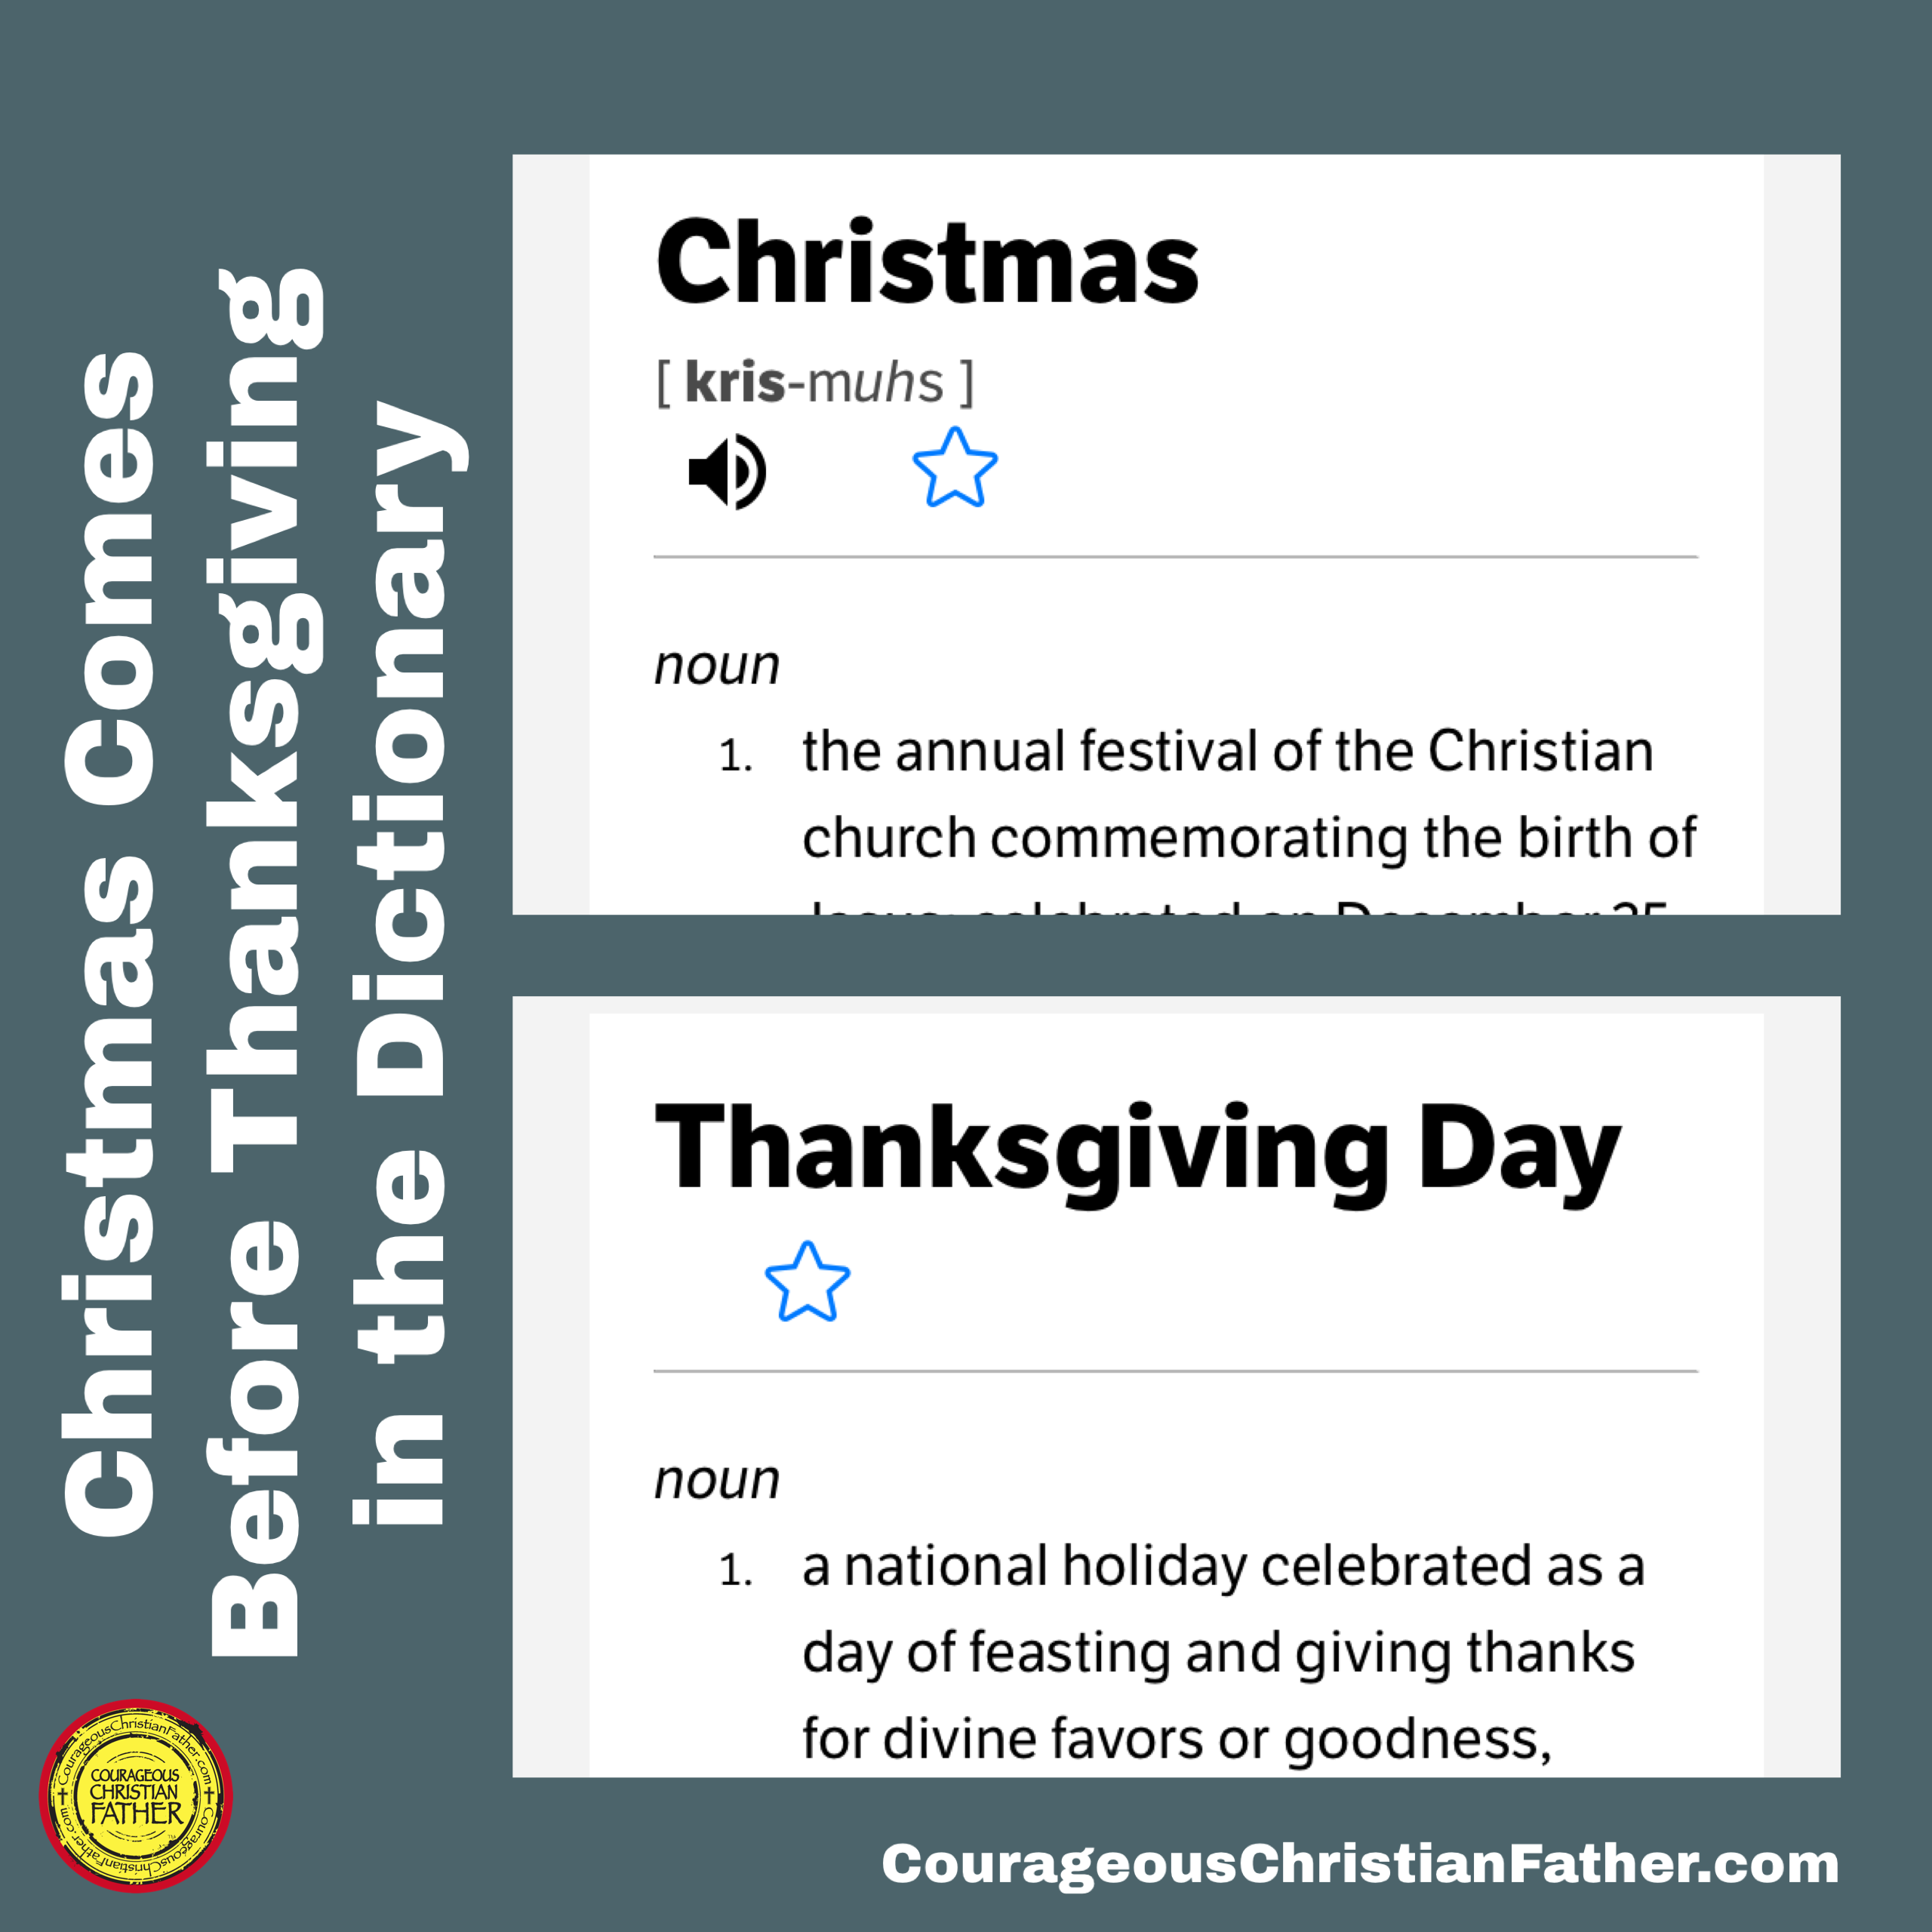 Christmas Comes Before Thanksgiving in the Dictionary - We often rush from one holiday to the next, it's essential to pause and reflect on the significance of each season. While most of us know that Christmas follows Thanksgiving on the calendar, let's explore the idea that in the dictionary, Christmas comes before Thanksgiving in a unique and beautiful way.